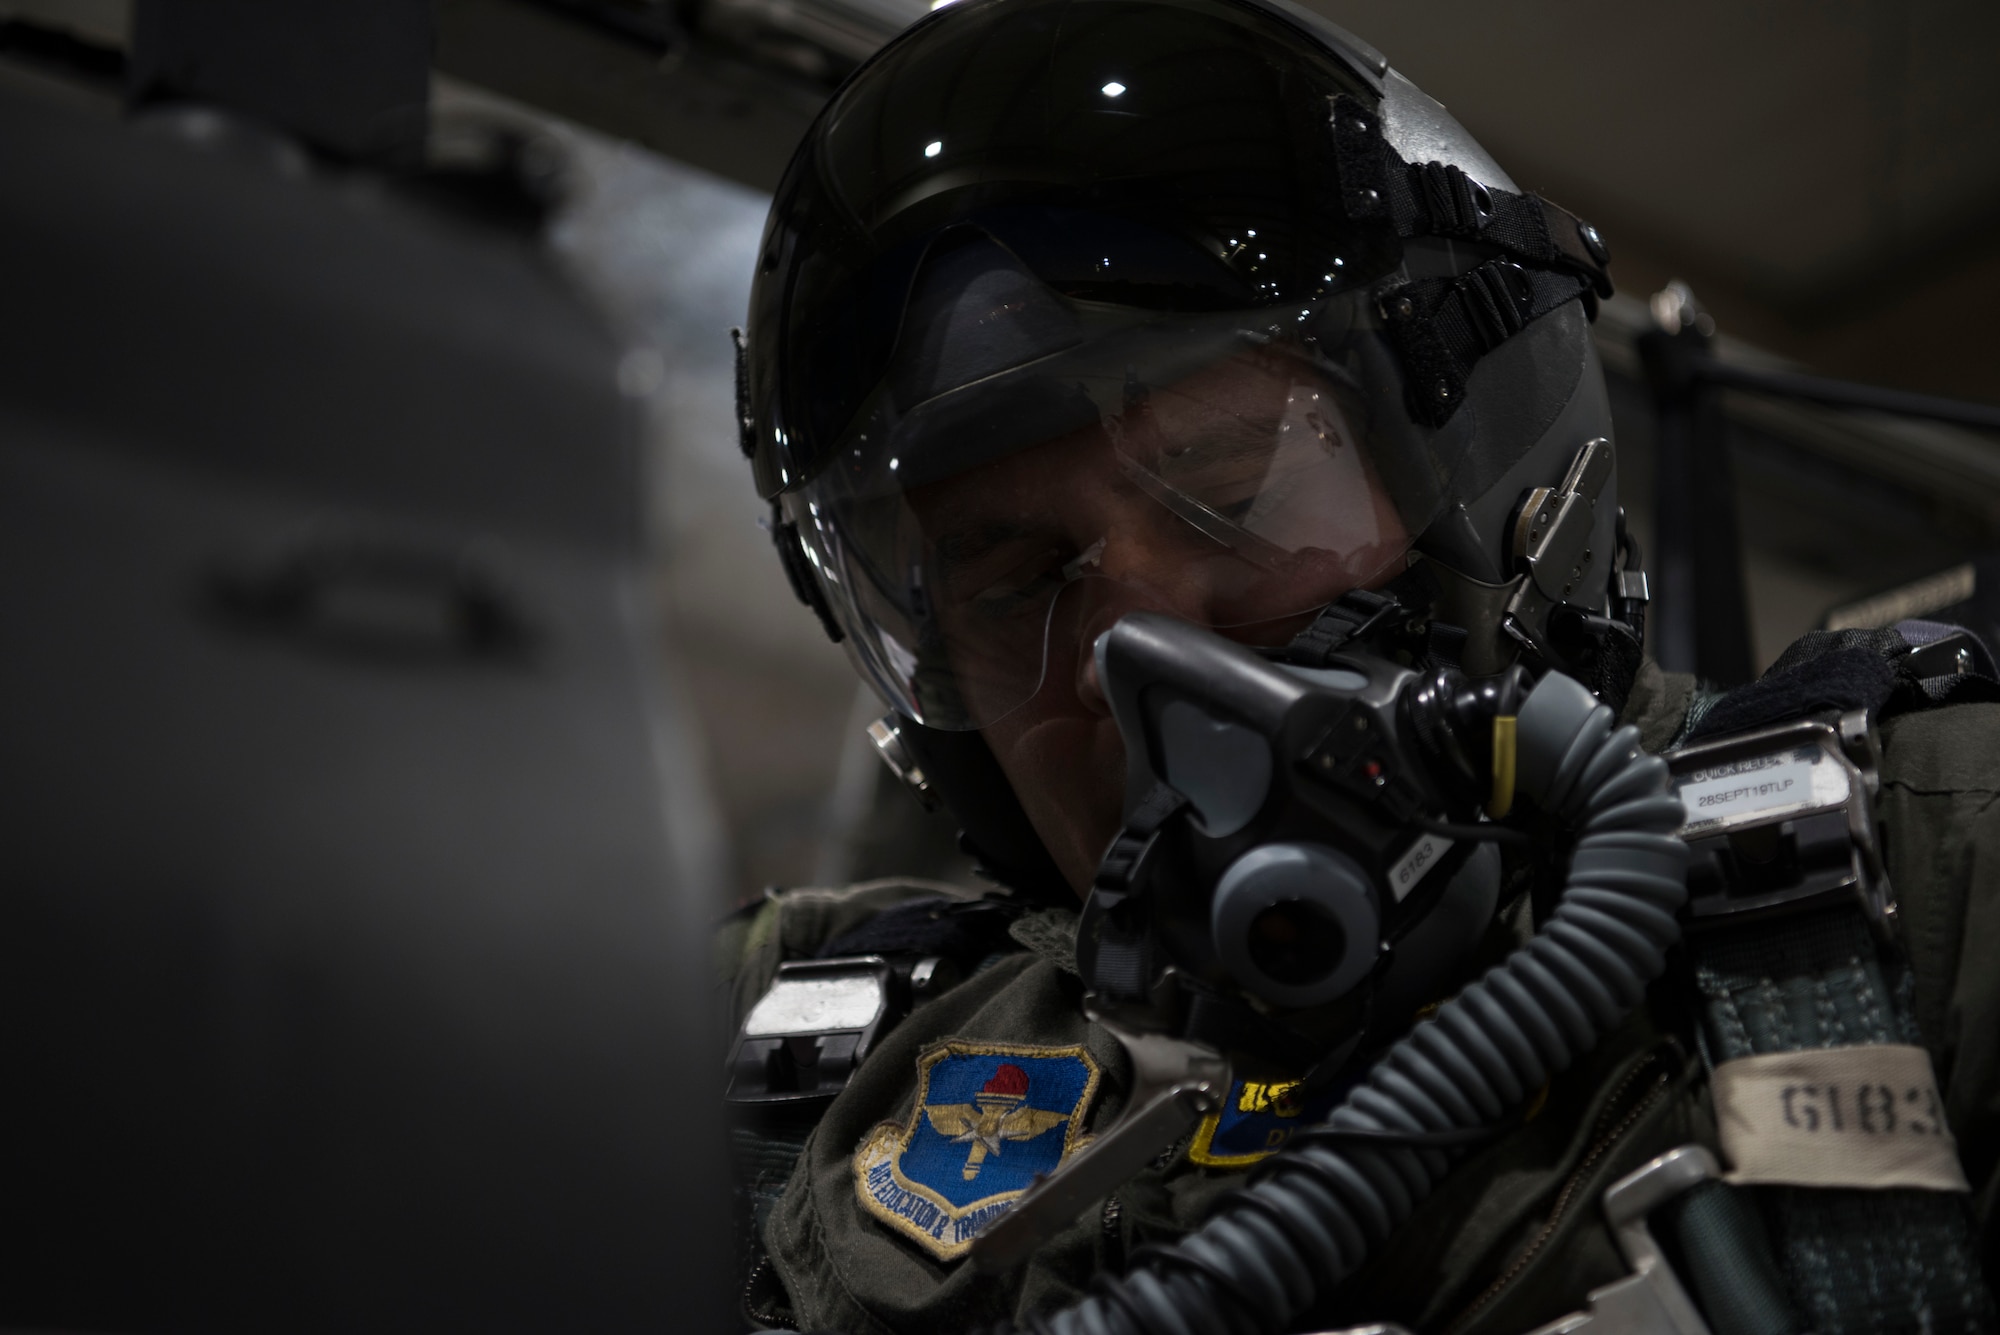 First Lt. Benjamin Peña, 85th Flying Training Squadron instructor pilot, sits in a T-6A Texan II, preparing for takeoff on Sept. 18, 2019 at Laughlin Air Force Base, Texas. Night flying at a Specialized Undergraduate Pilot Training base allows not only more hours in the sky, but it also provides a variety experience so pilots can become accustomed to instrument flying. (U.S. Air Force photo by Senior Airman Marco A. Gomez)